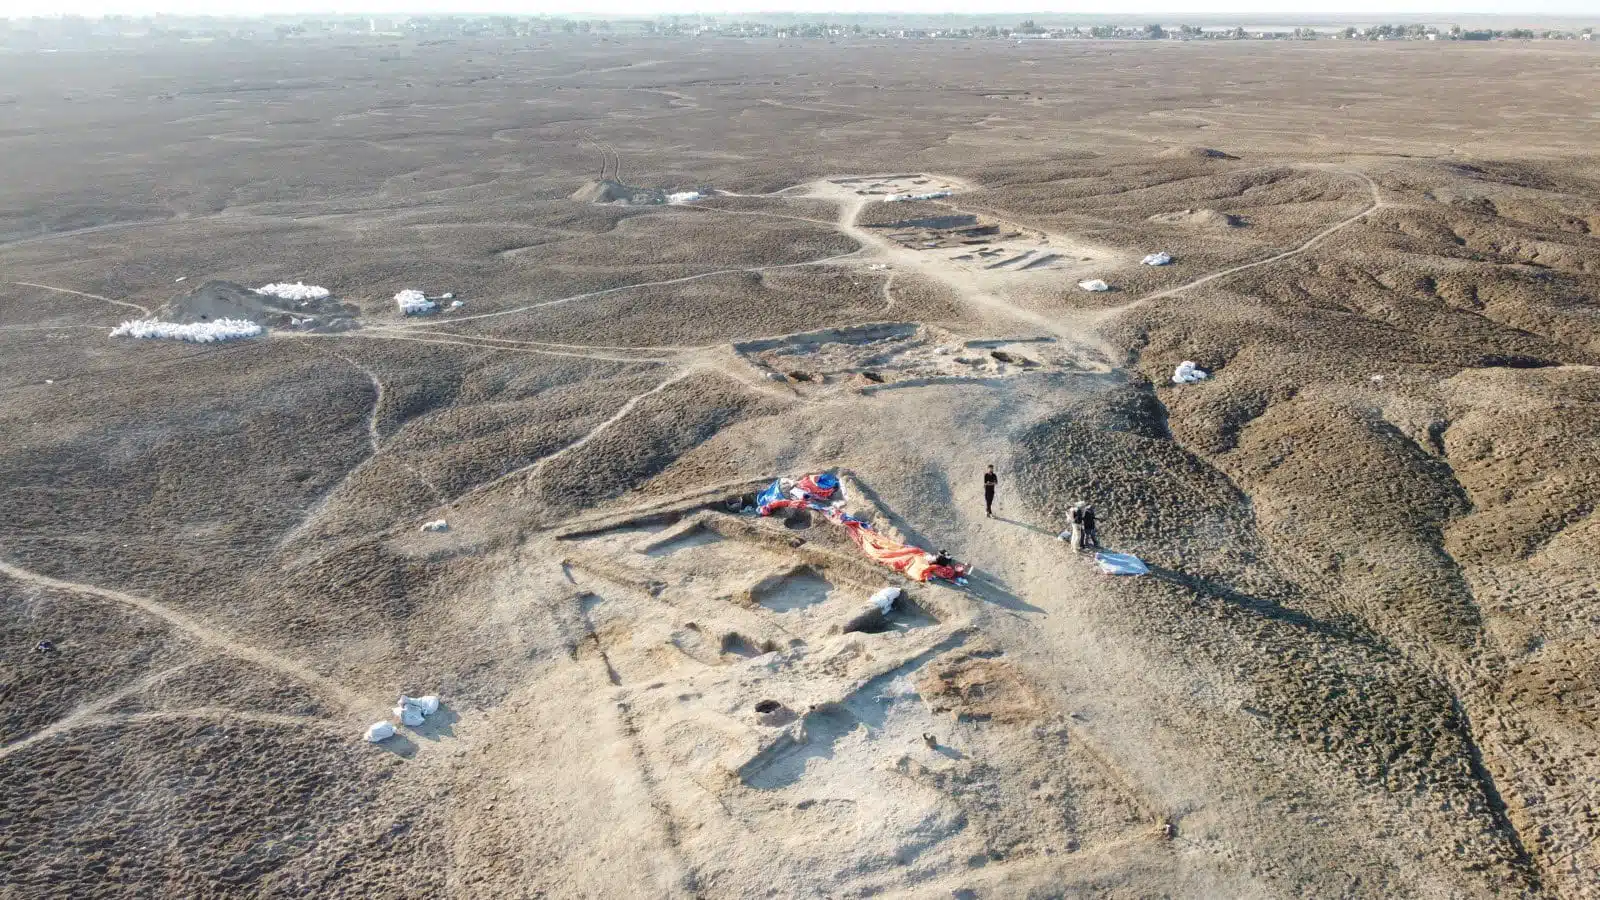 A nearly 5,000 year old tavern was excavated at the site of ancient Lagash in Iraq